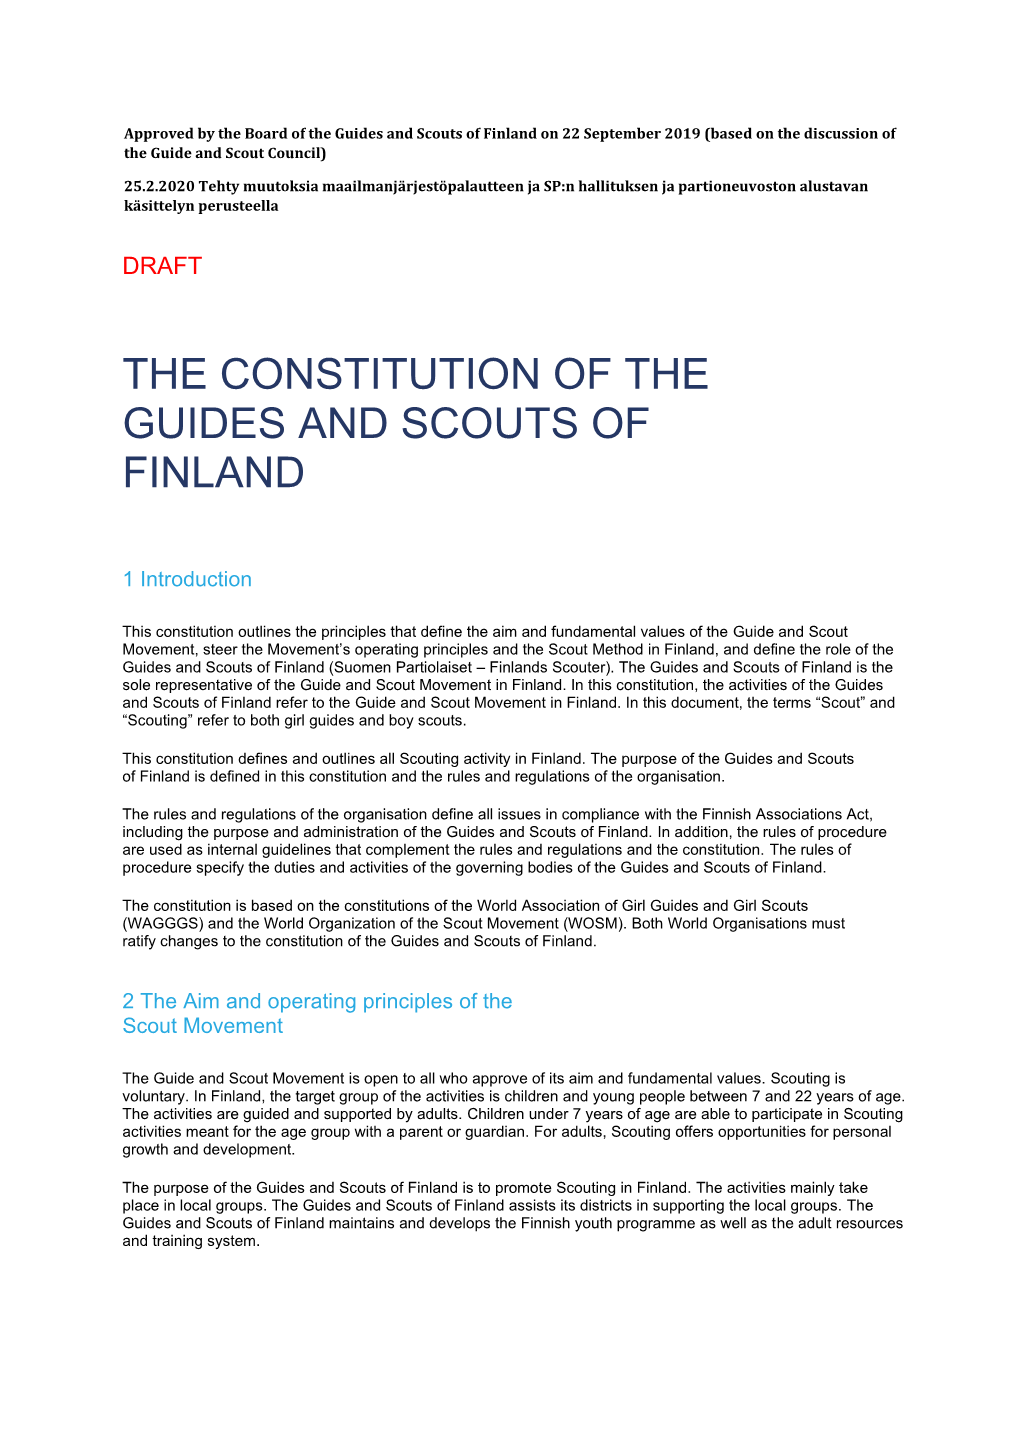 The Constitution of the Guides and Scouts of Finland